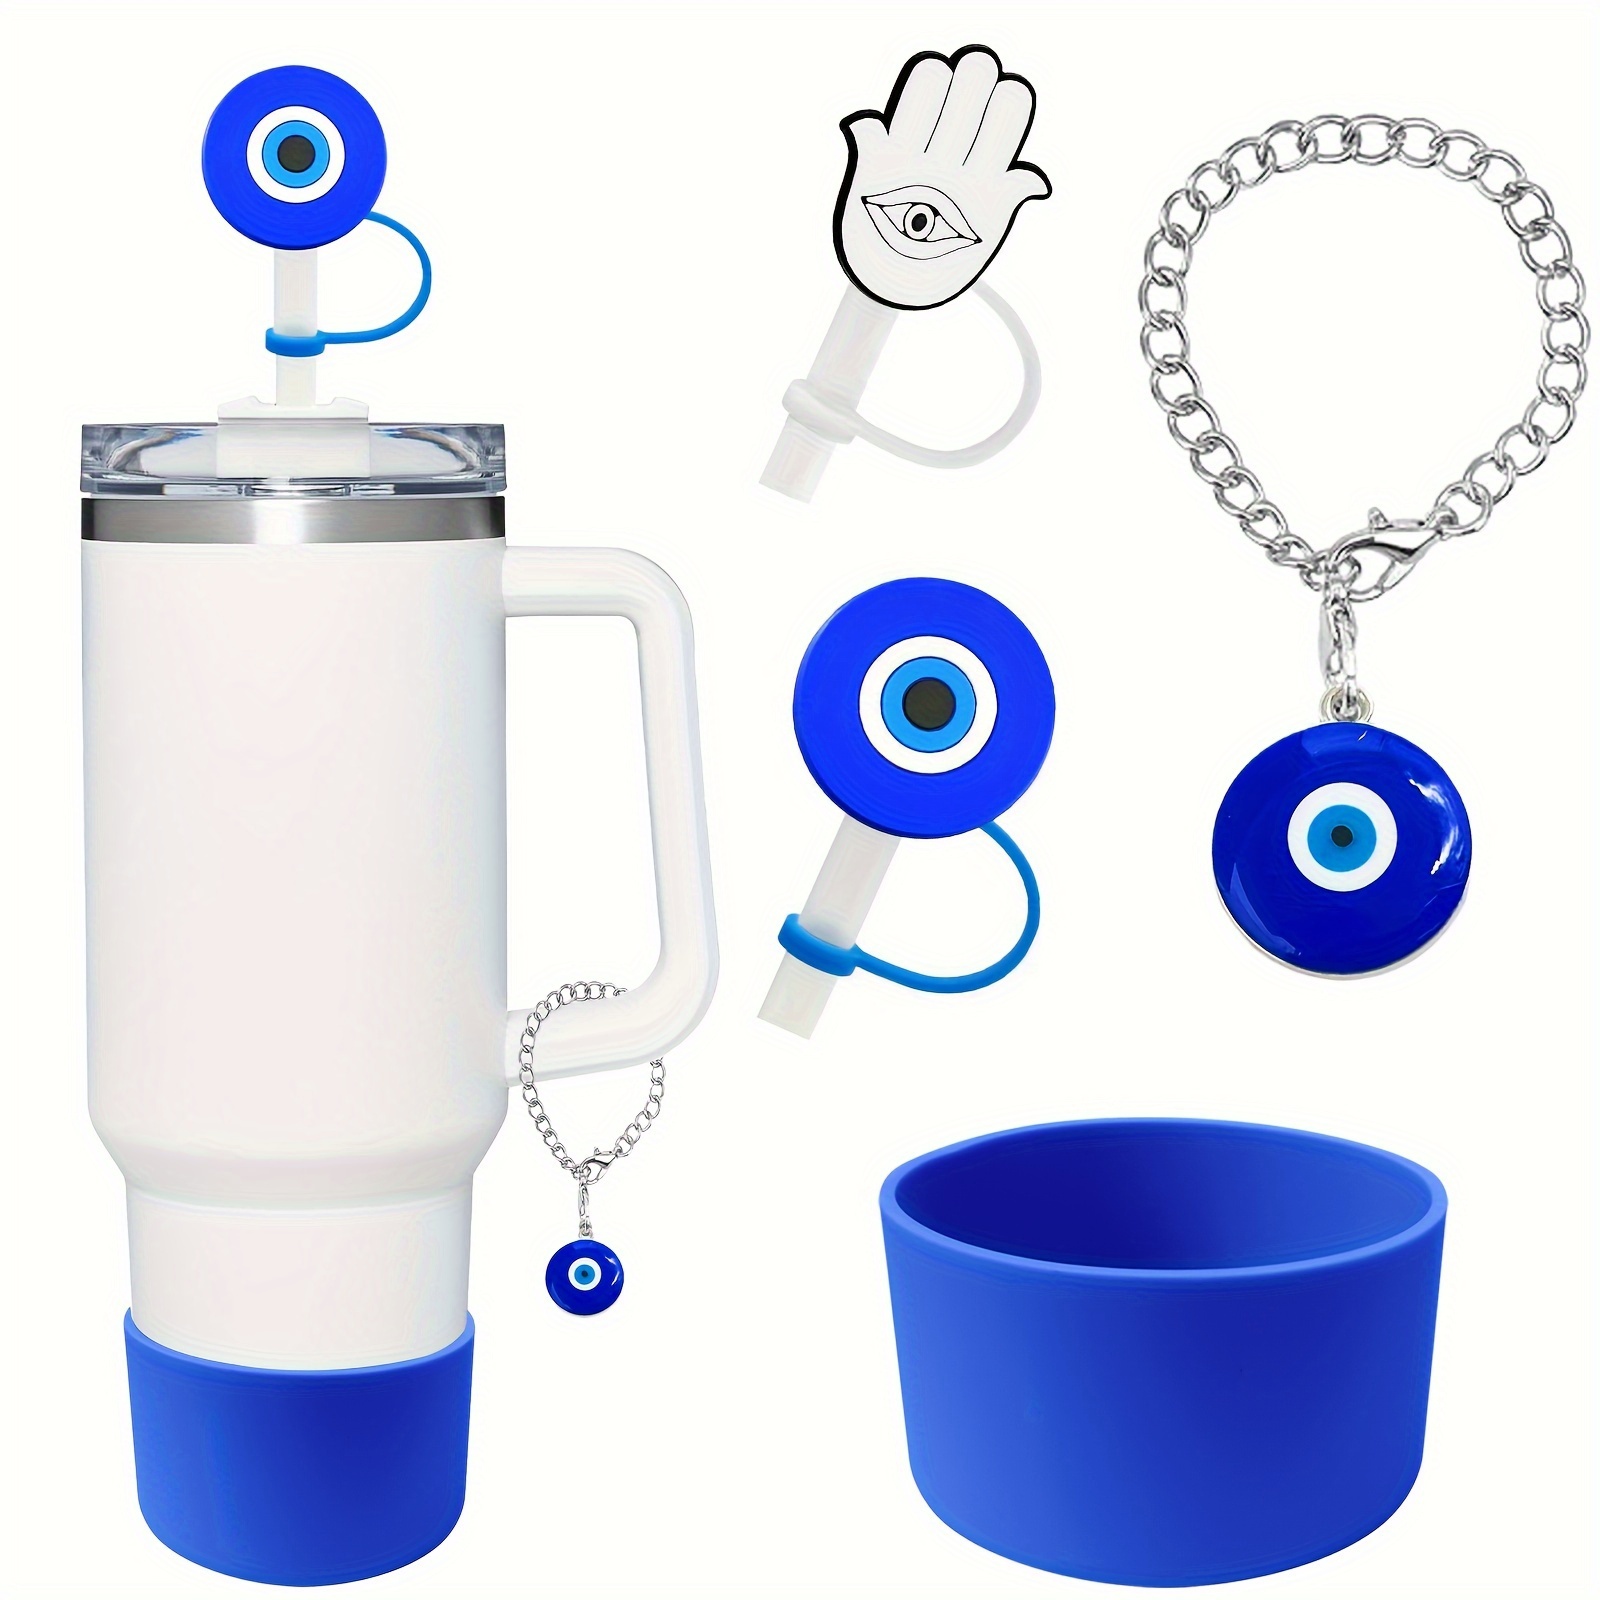 

4pcs Blue Eye Pattern Tumbler Accessory Set - Fits Stanley 30 & 40 Oz, Includes 2 Silicone Straw Covers, 1 Clip-on Eye Charm, 1 Protective Bottom Sleeve